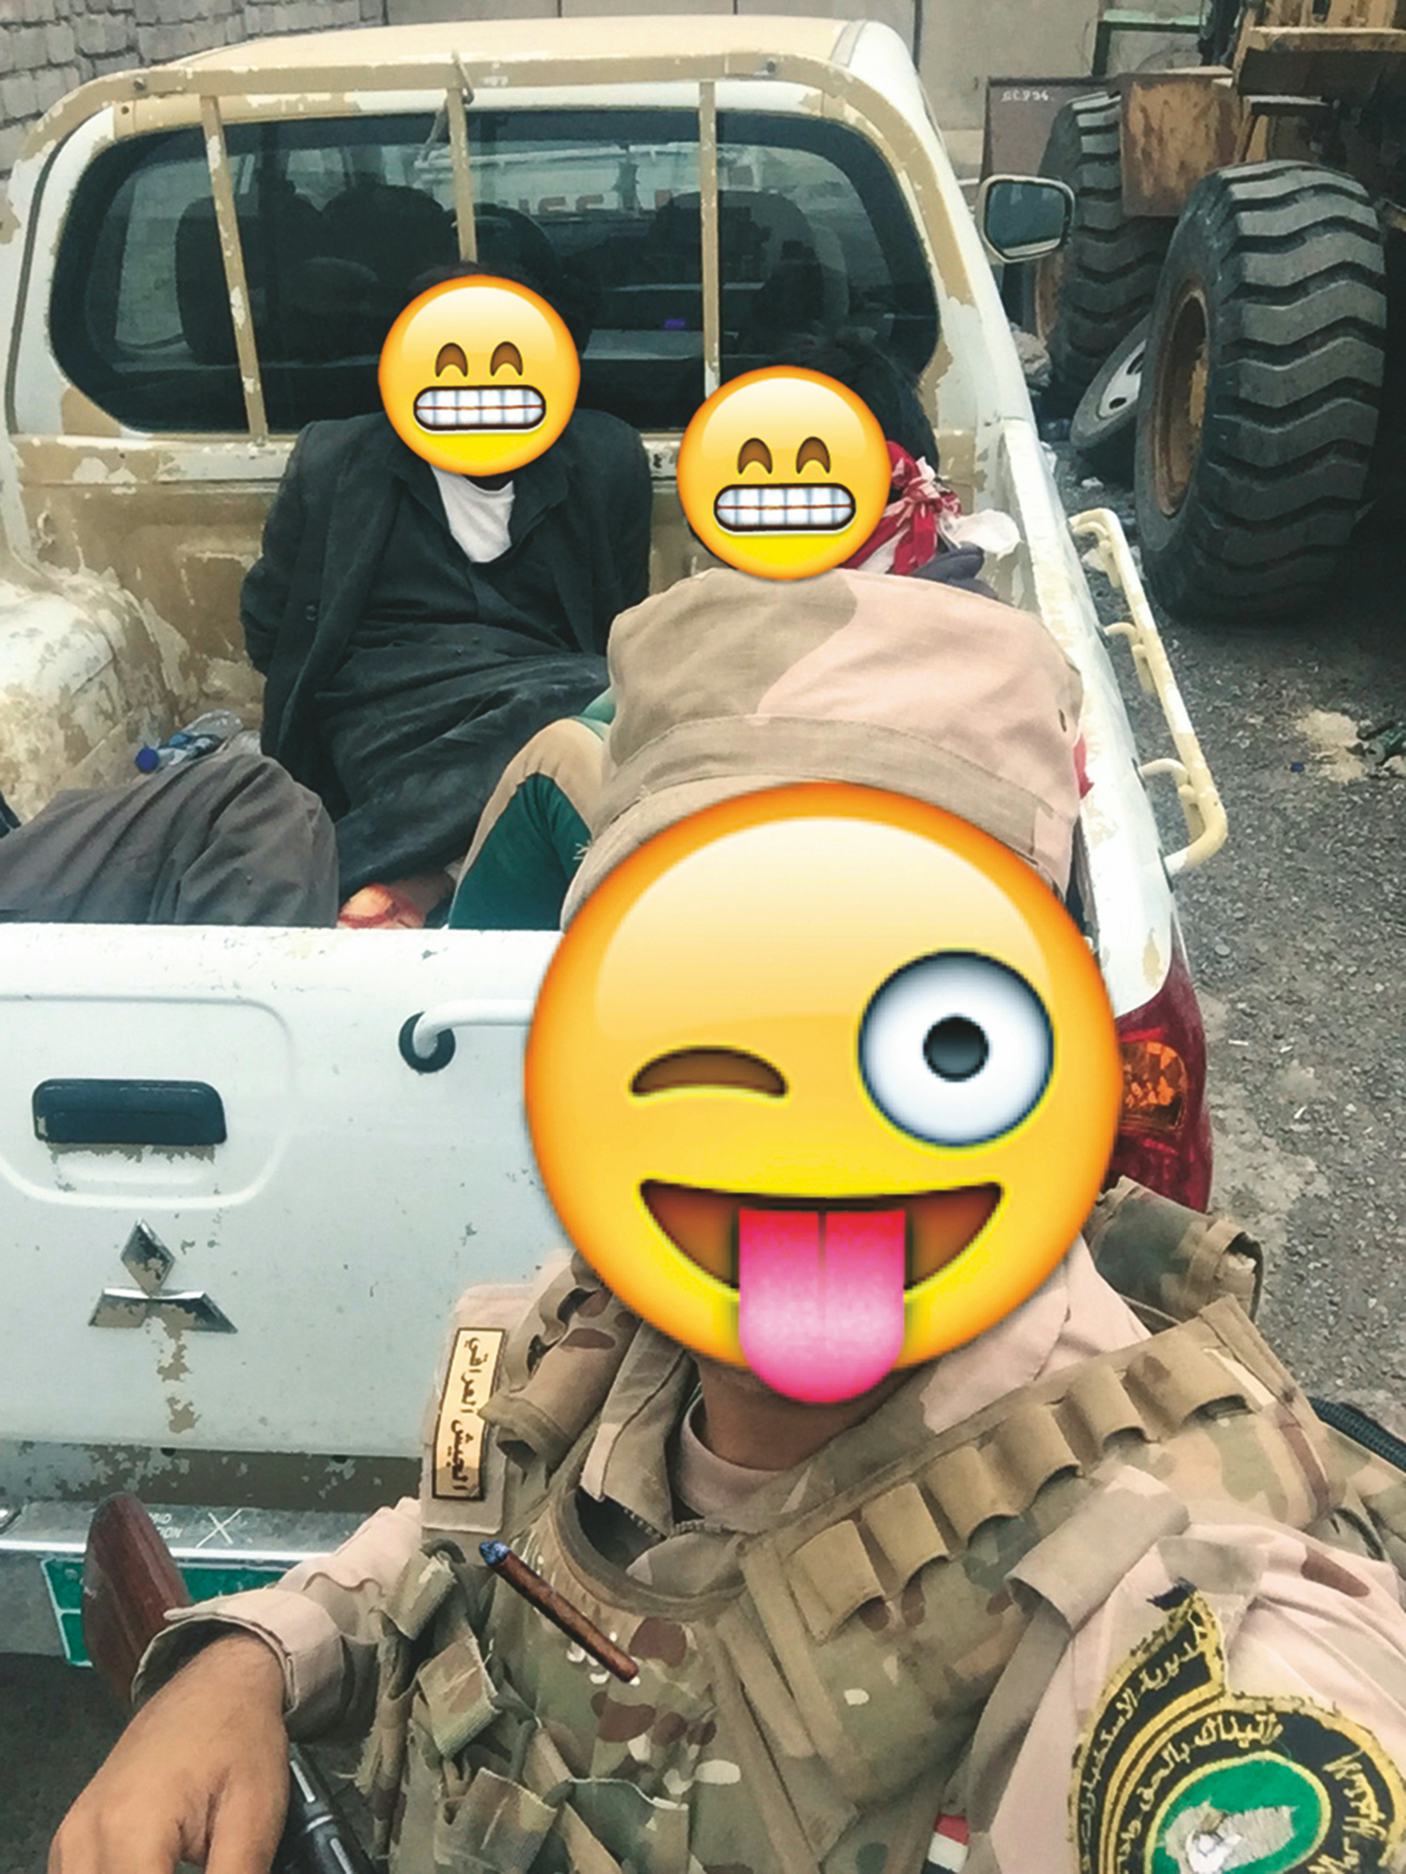 Selfie image of a soldier standing behind a truck, on which two men are kept captive. All three faces are covered by smiling and winking emojis.